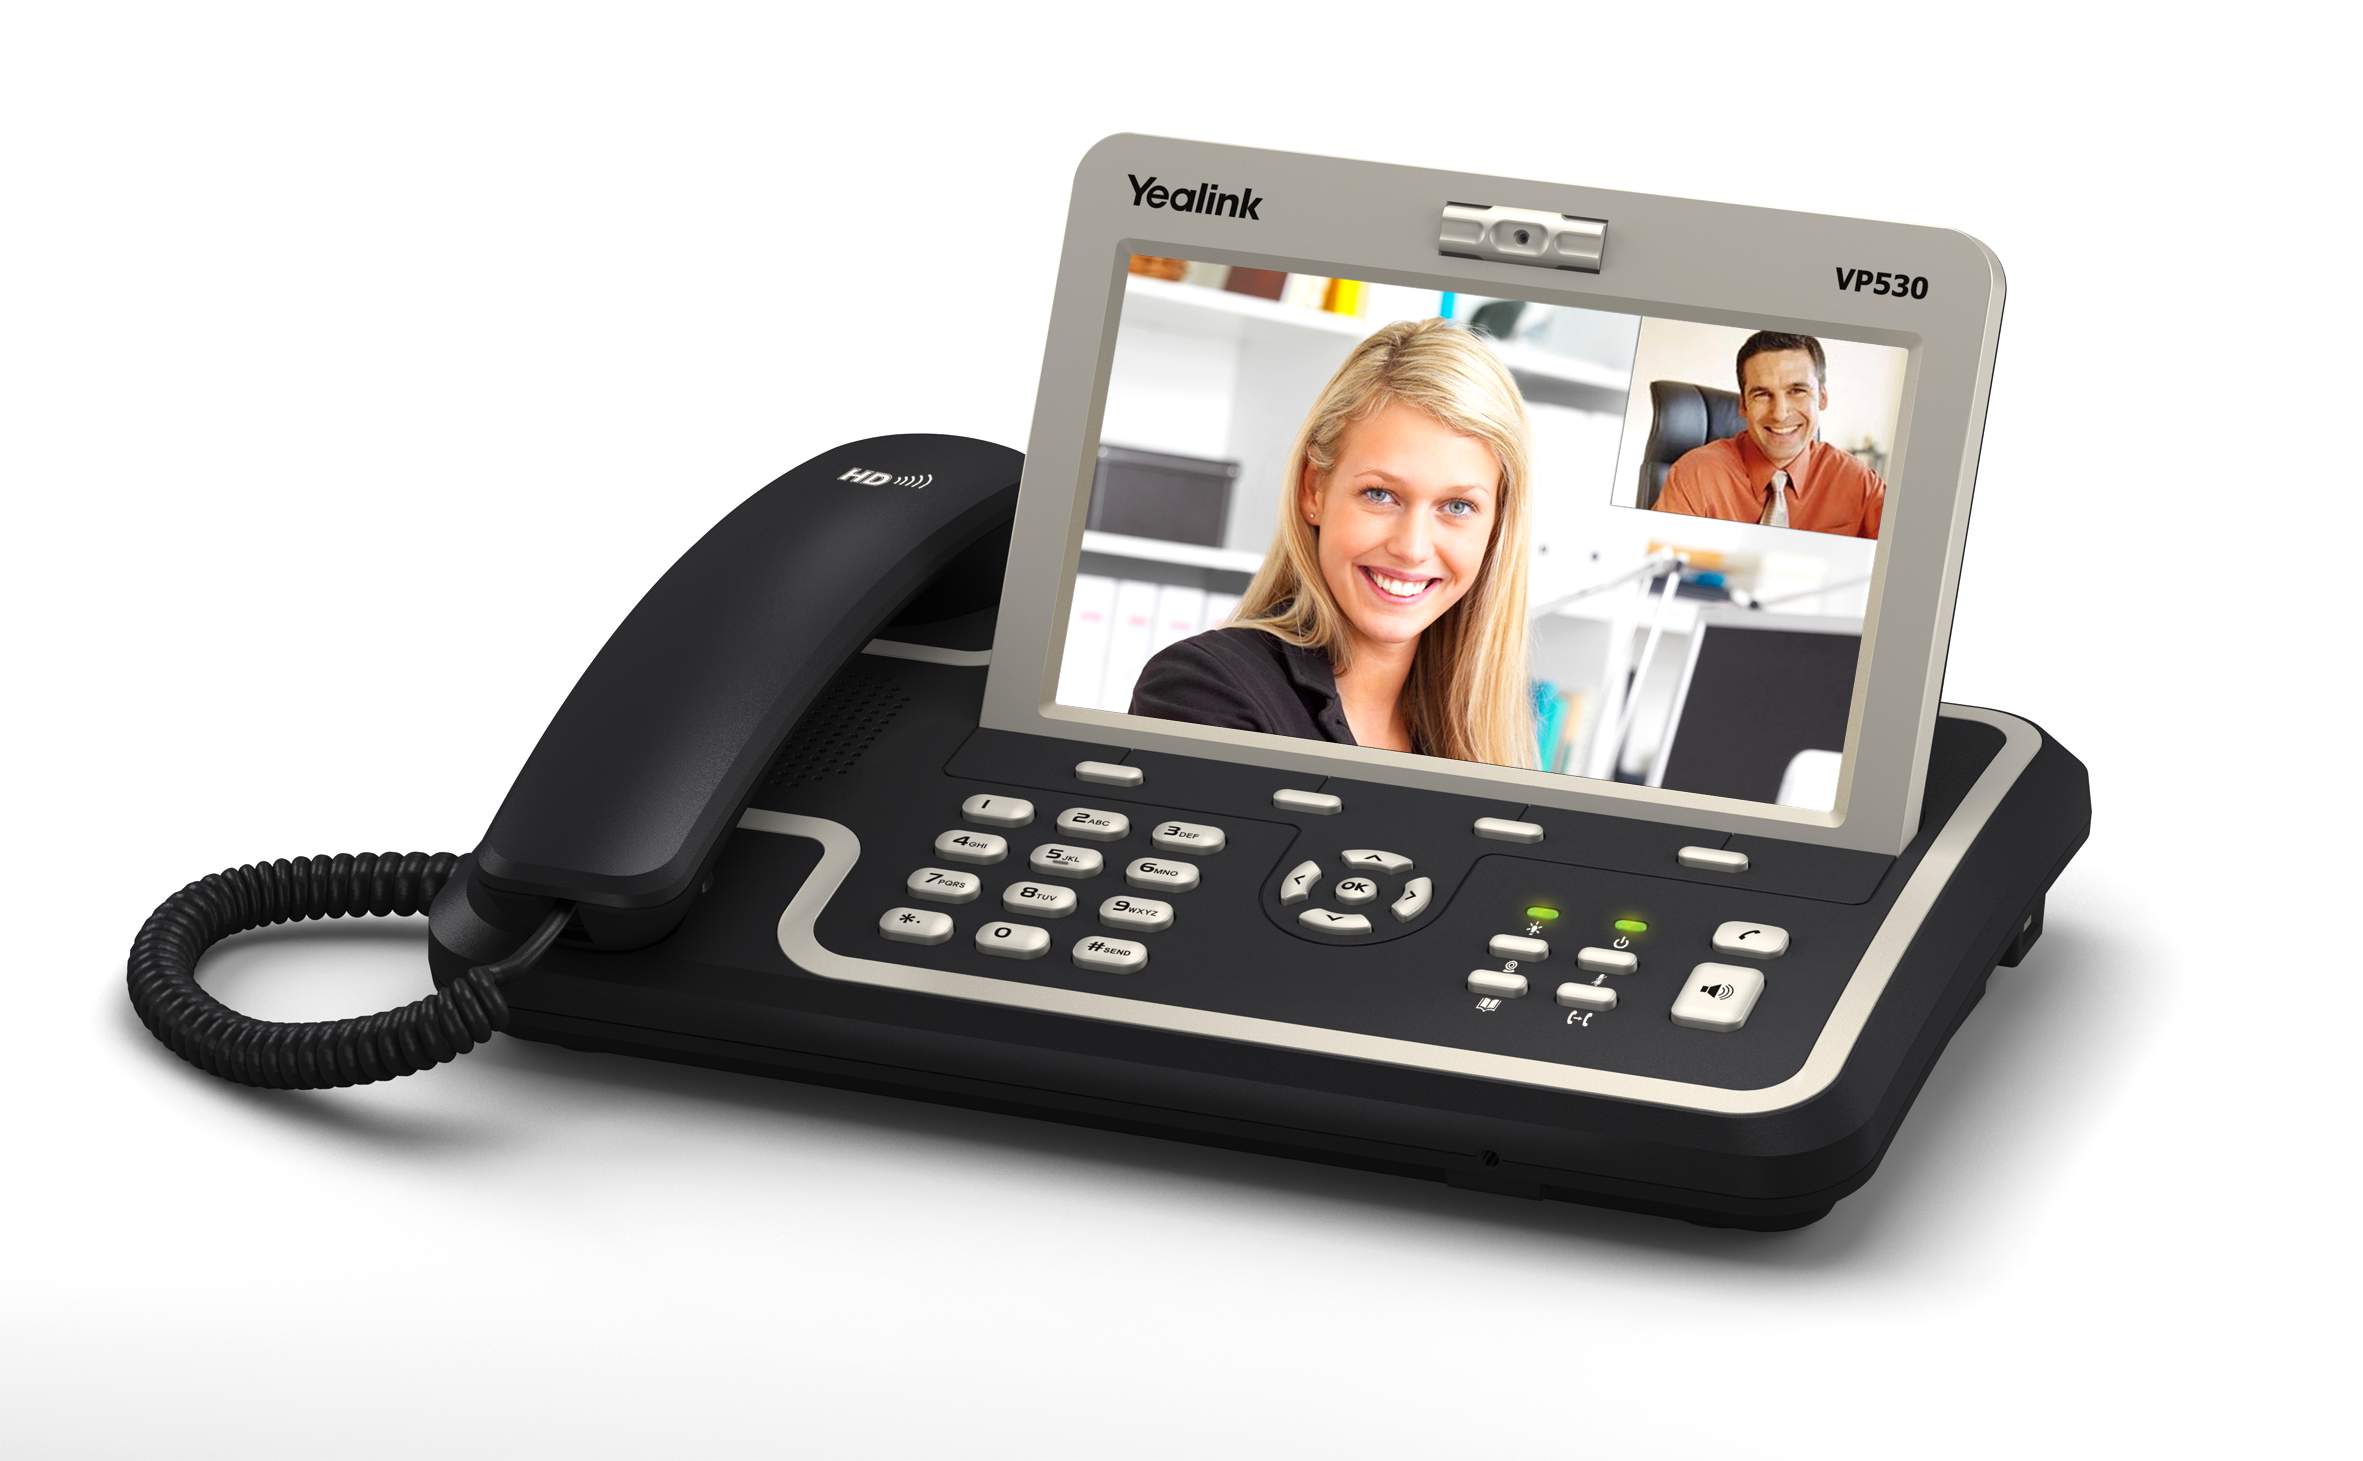 YEALINK VOIP Phone VP530 VP-530 - Click Image to Close